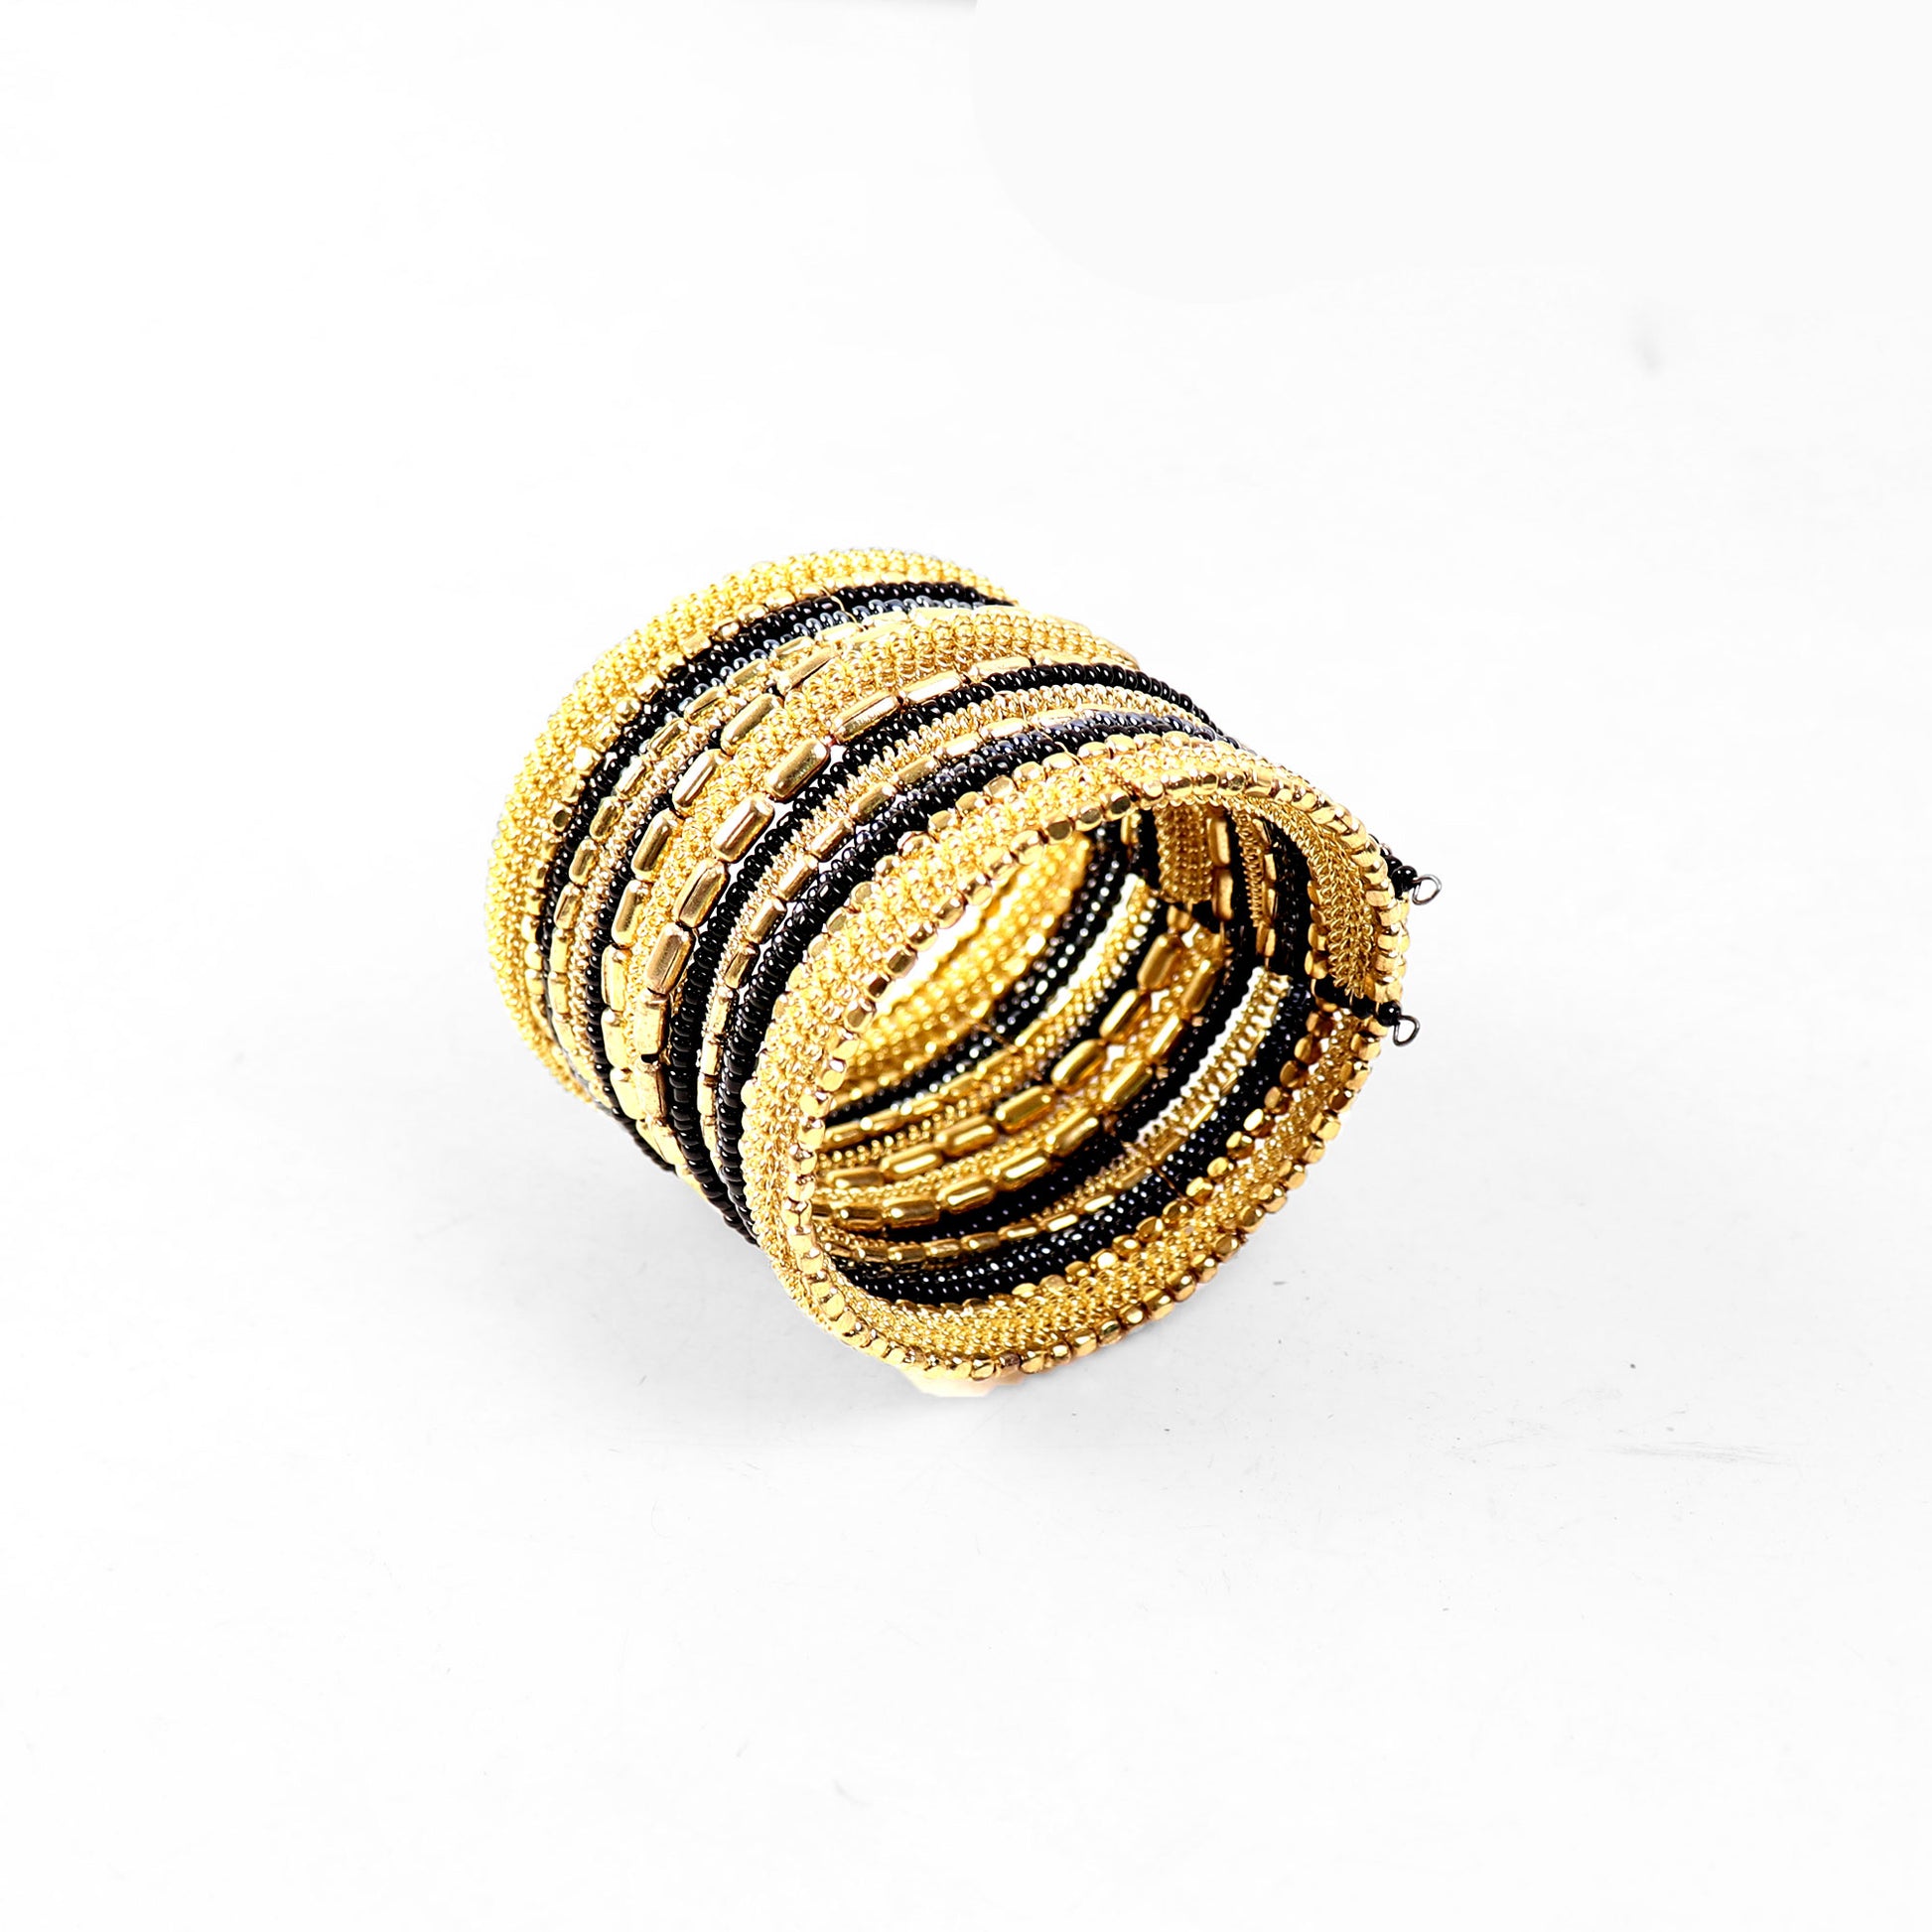 Hand Cuff,Cast a Spell Bangle Set in Golden hue - Cippele Multi Store